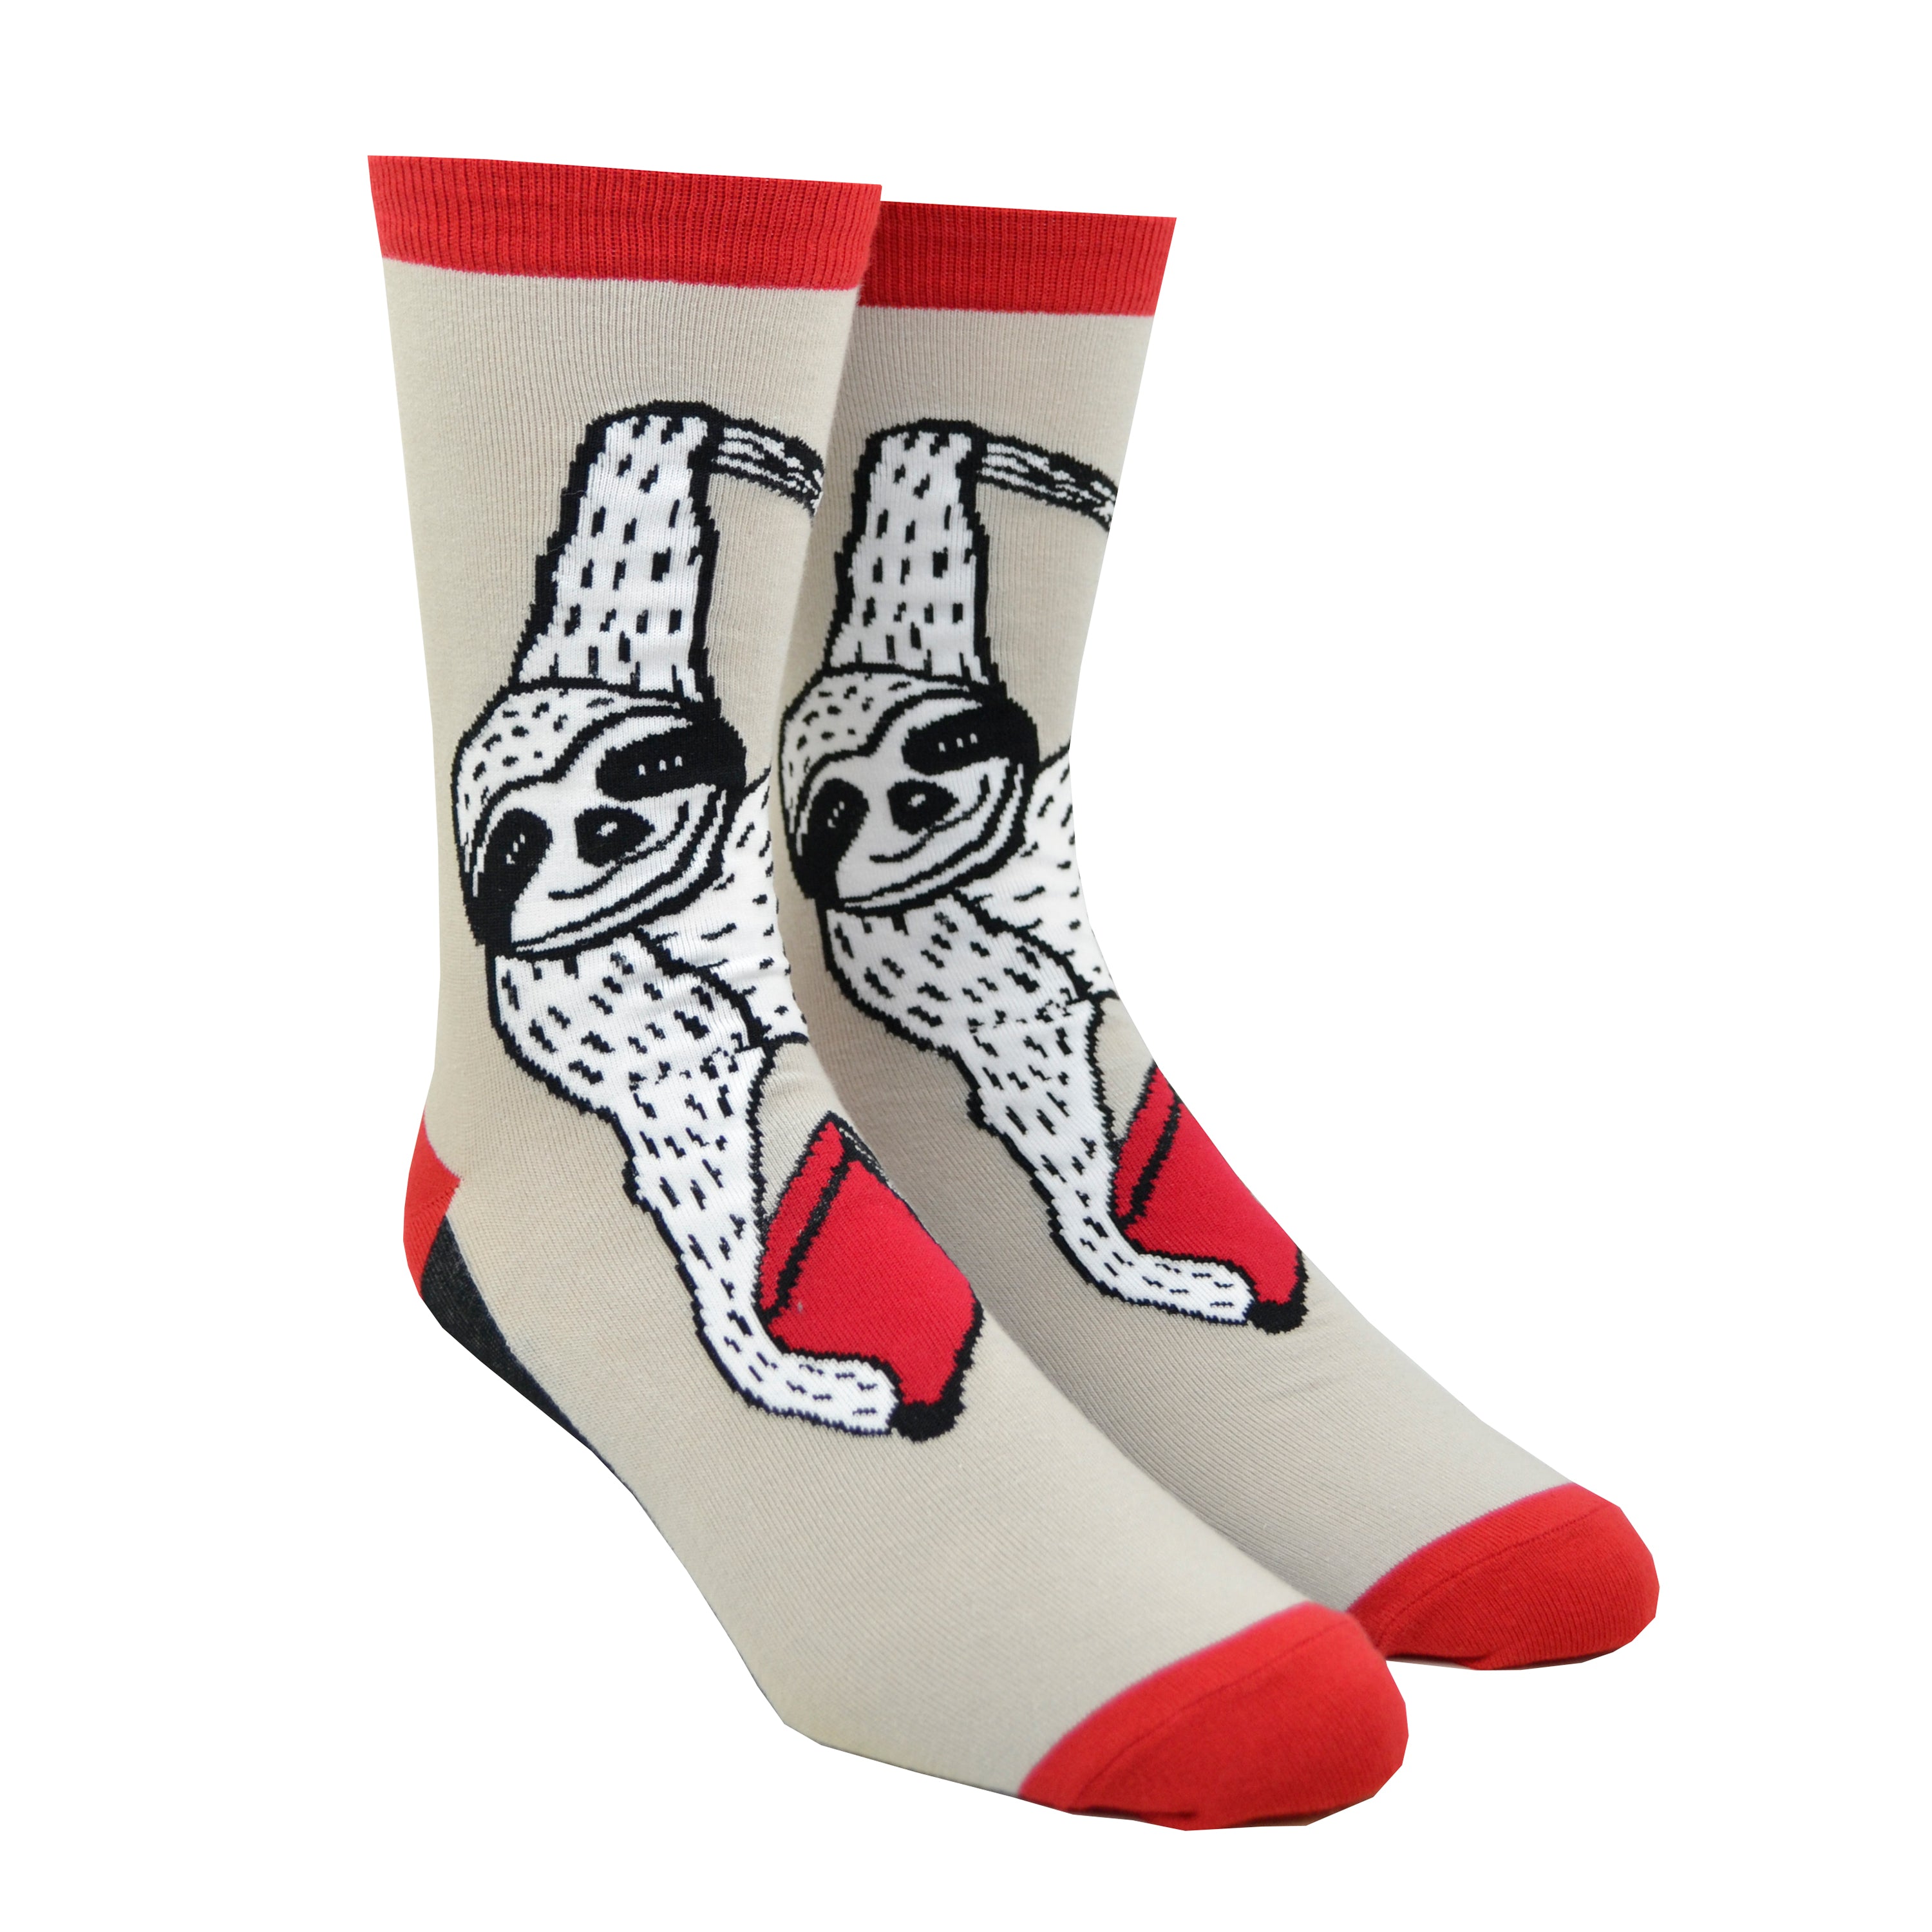 Shown in the larger size on leg forms, a pair of Out of Print brand unisex cotton crew socks in tan with a red heel/toe/cuff and a black sole. The sock features a black and white cartoon sloth hanging from a vine with a red book.